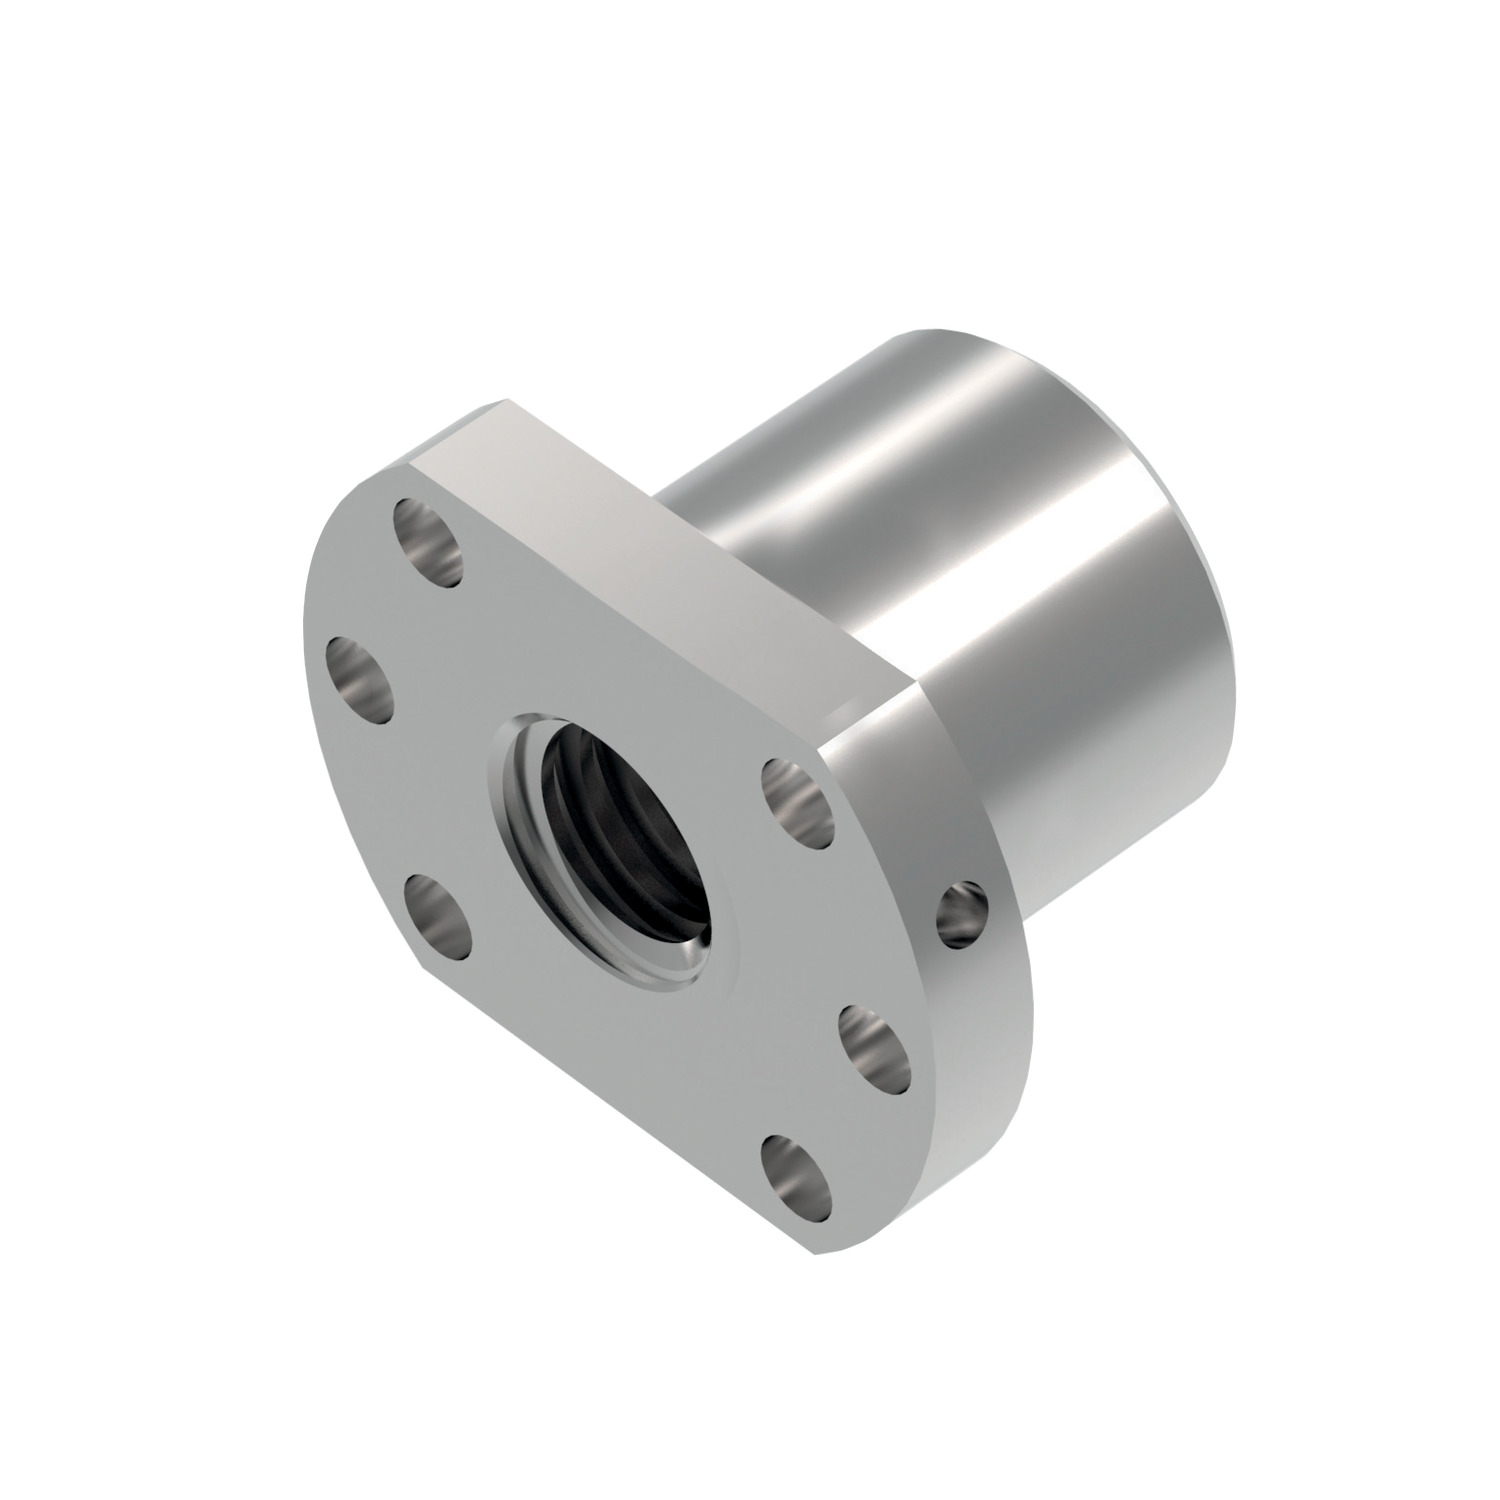 Flanged Ball Nuts Flanged ball nuts to compliment our rolled ball screw range.